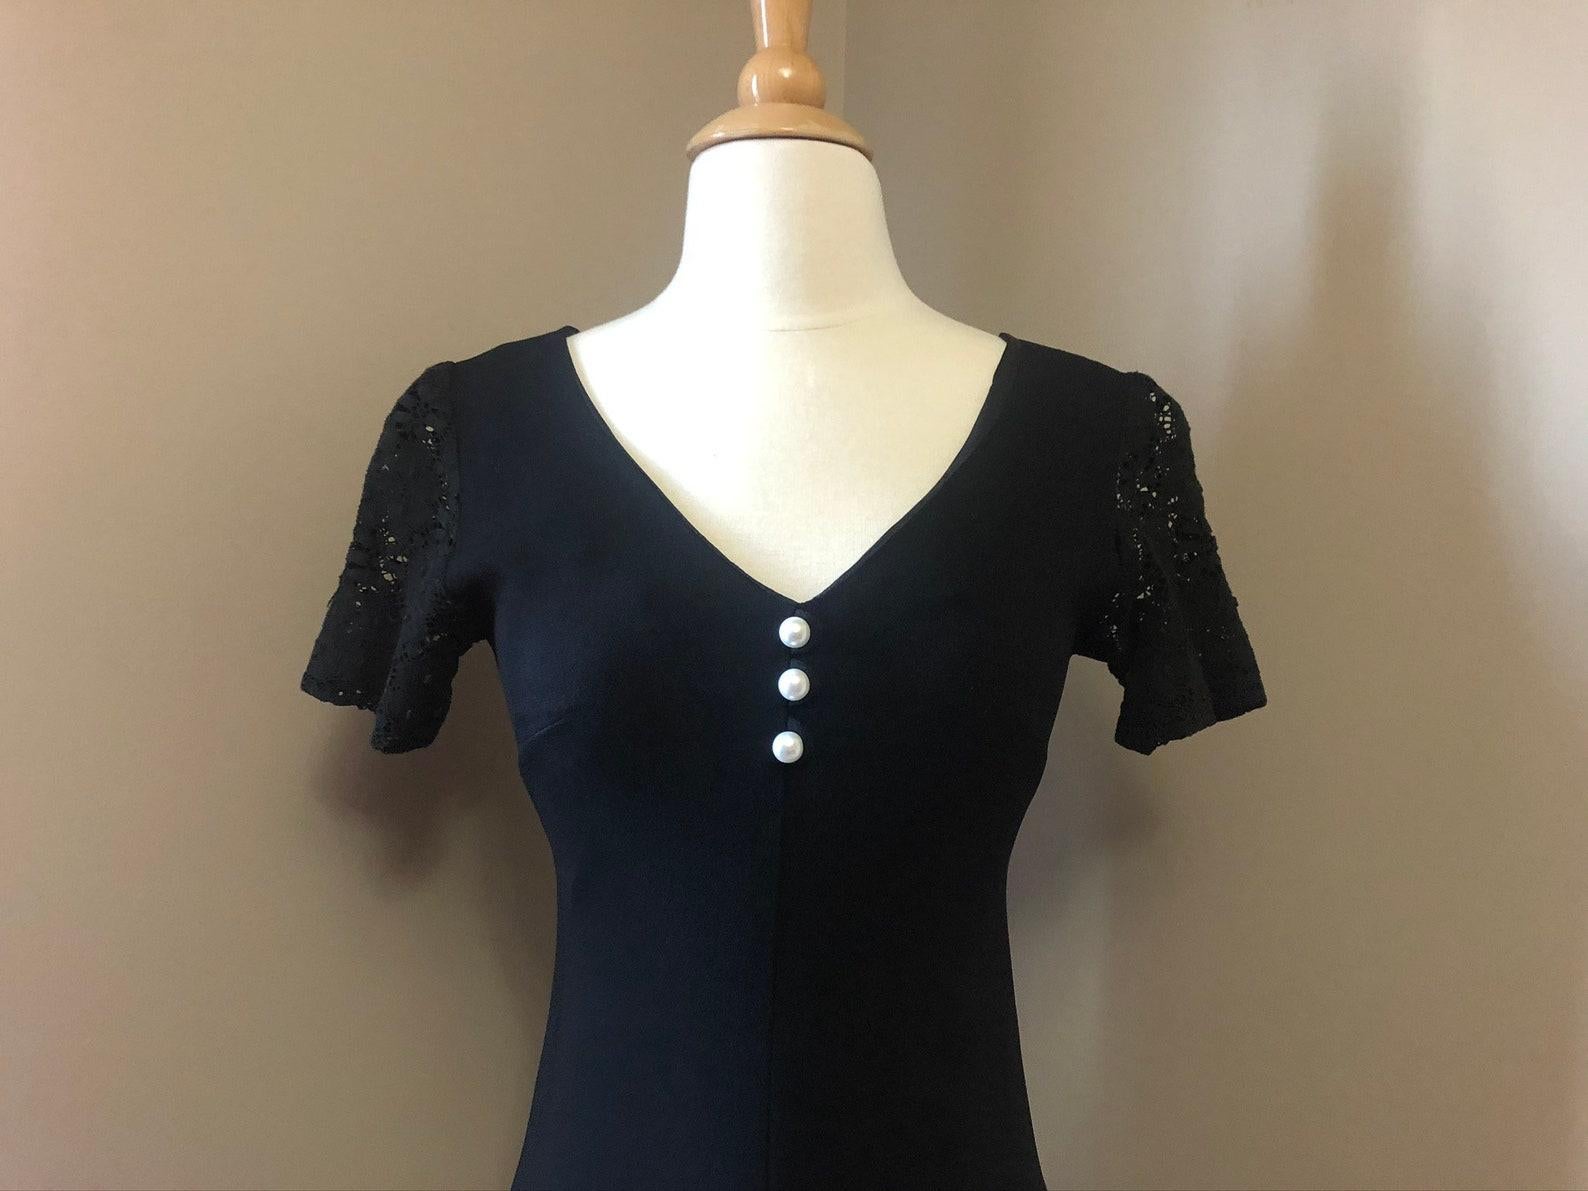 1960s Radley of London black mini dress In Excellent Condition For Sale In Brooklyn, NY